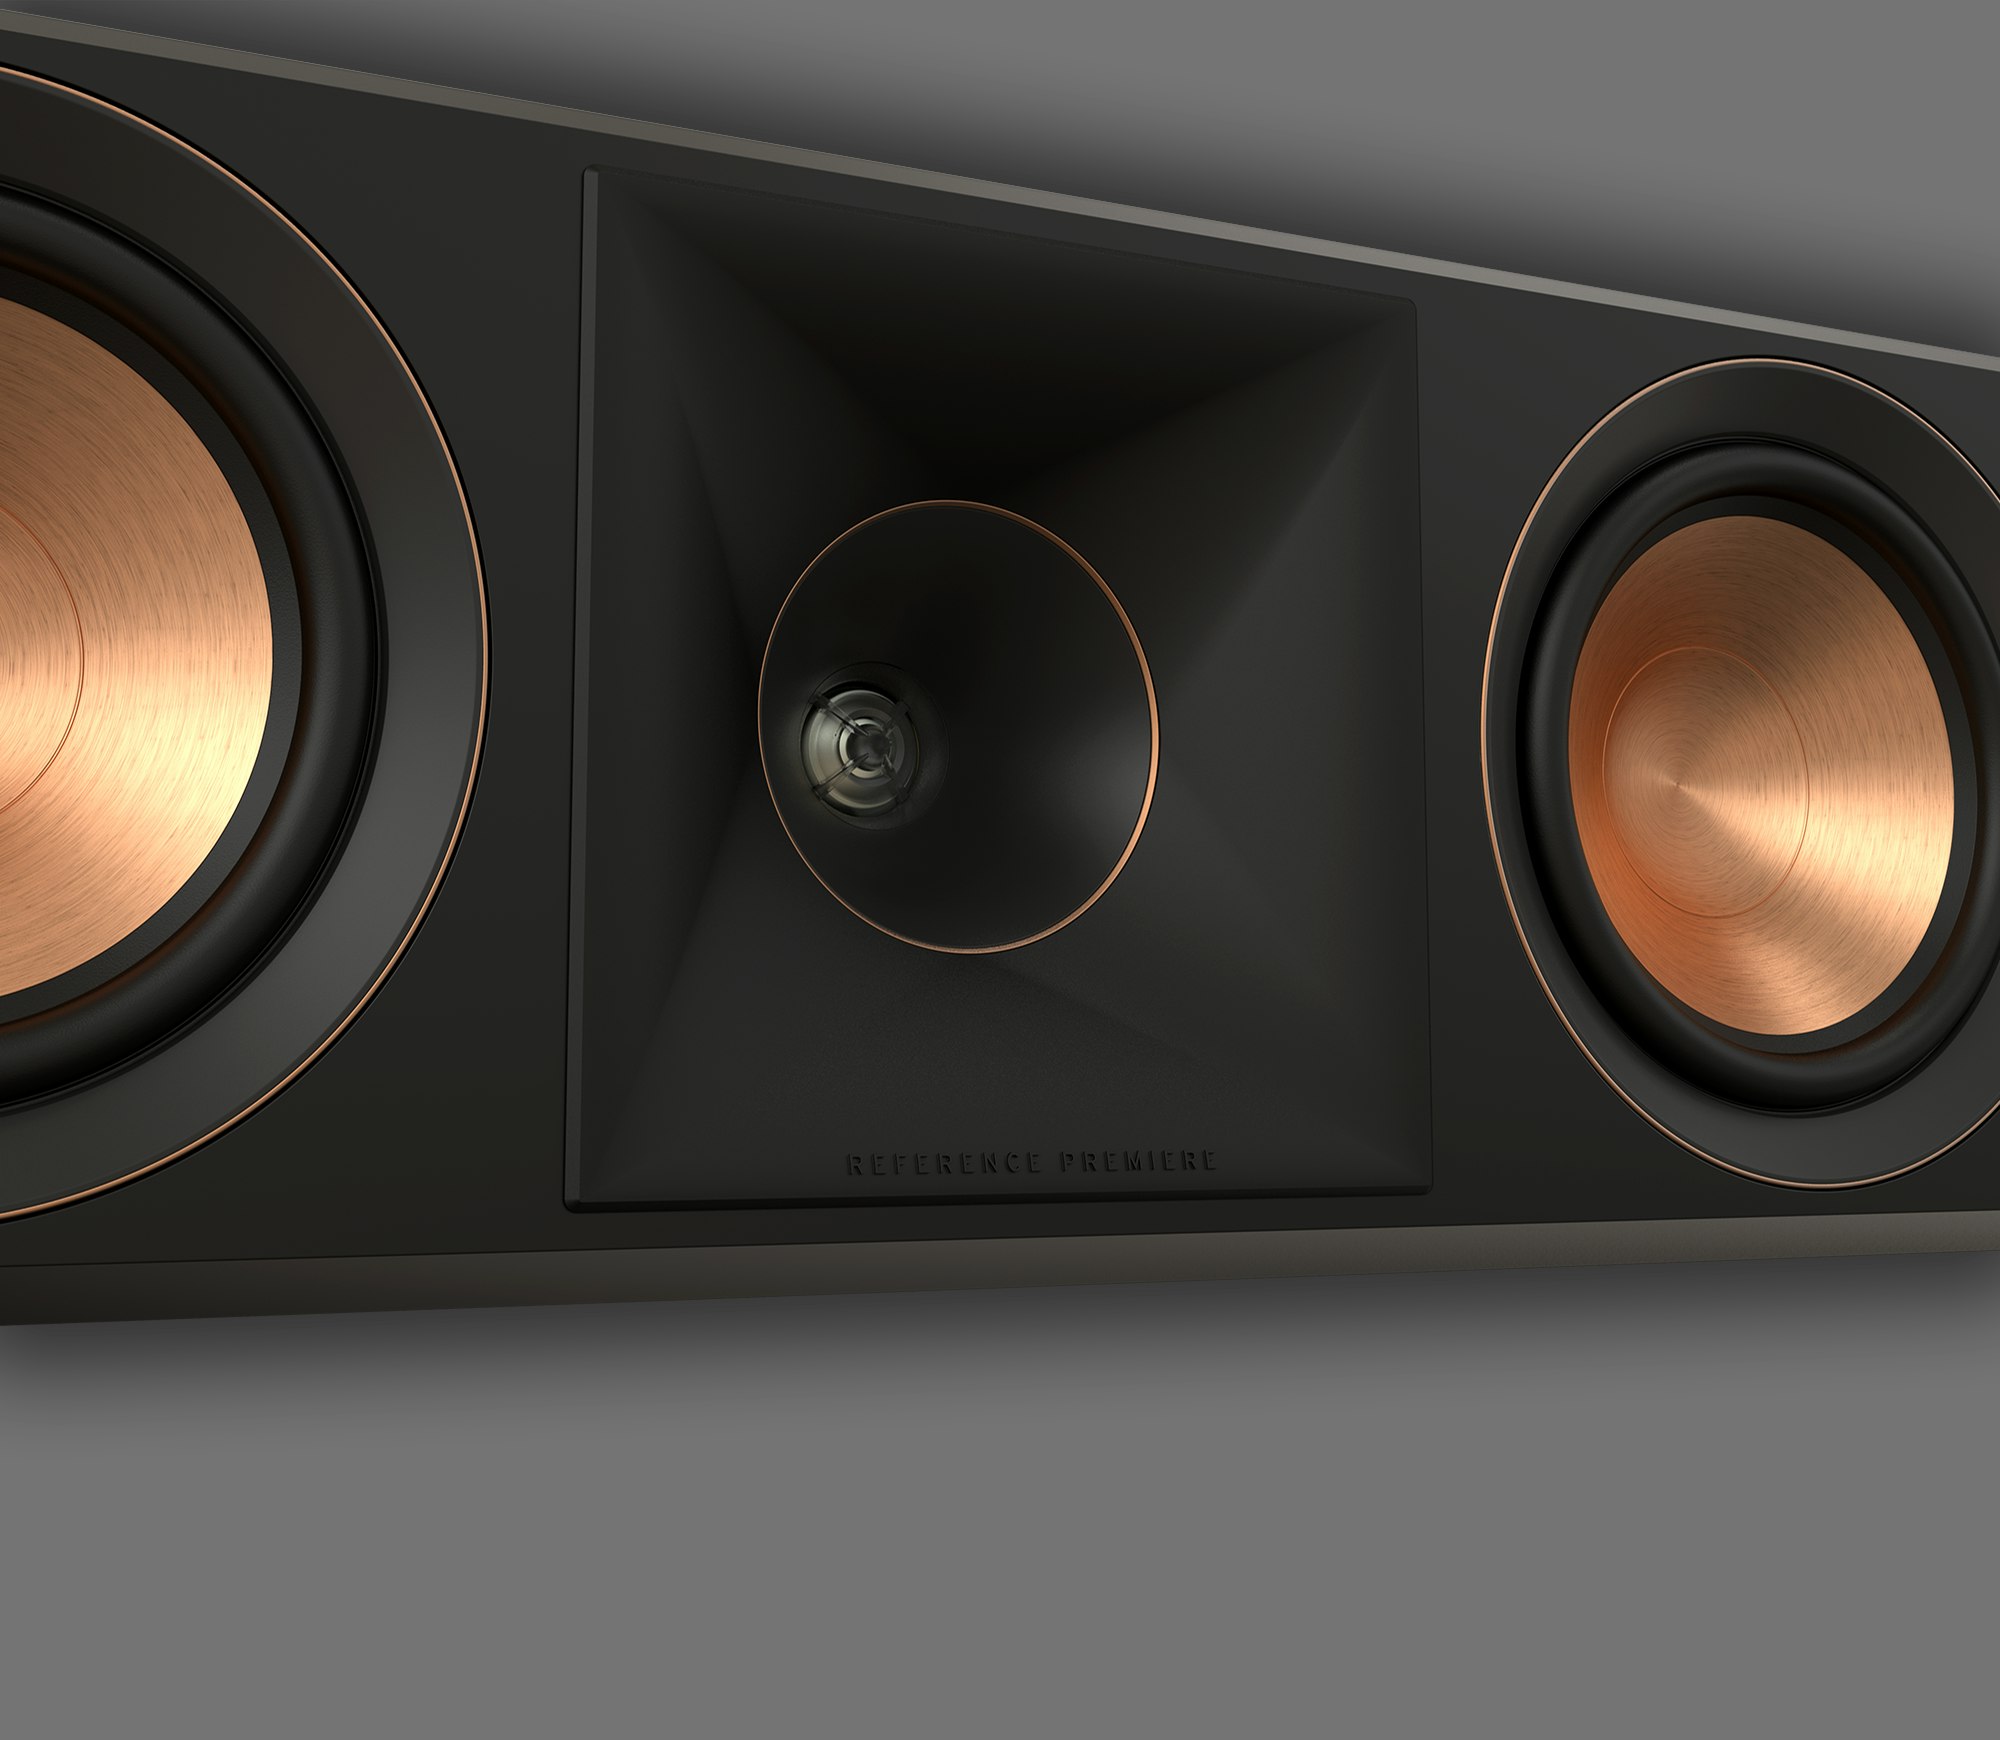 https://klipsch.imgix.net/images/RP-504C-II-Close-up-of-horn-with-copper-woofers-at-the-side-on-a-grey-background.png?auto=compress%2Cformat&fillTransforms=1&fit=clip&q=80&w=2000